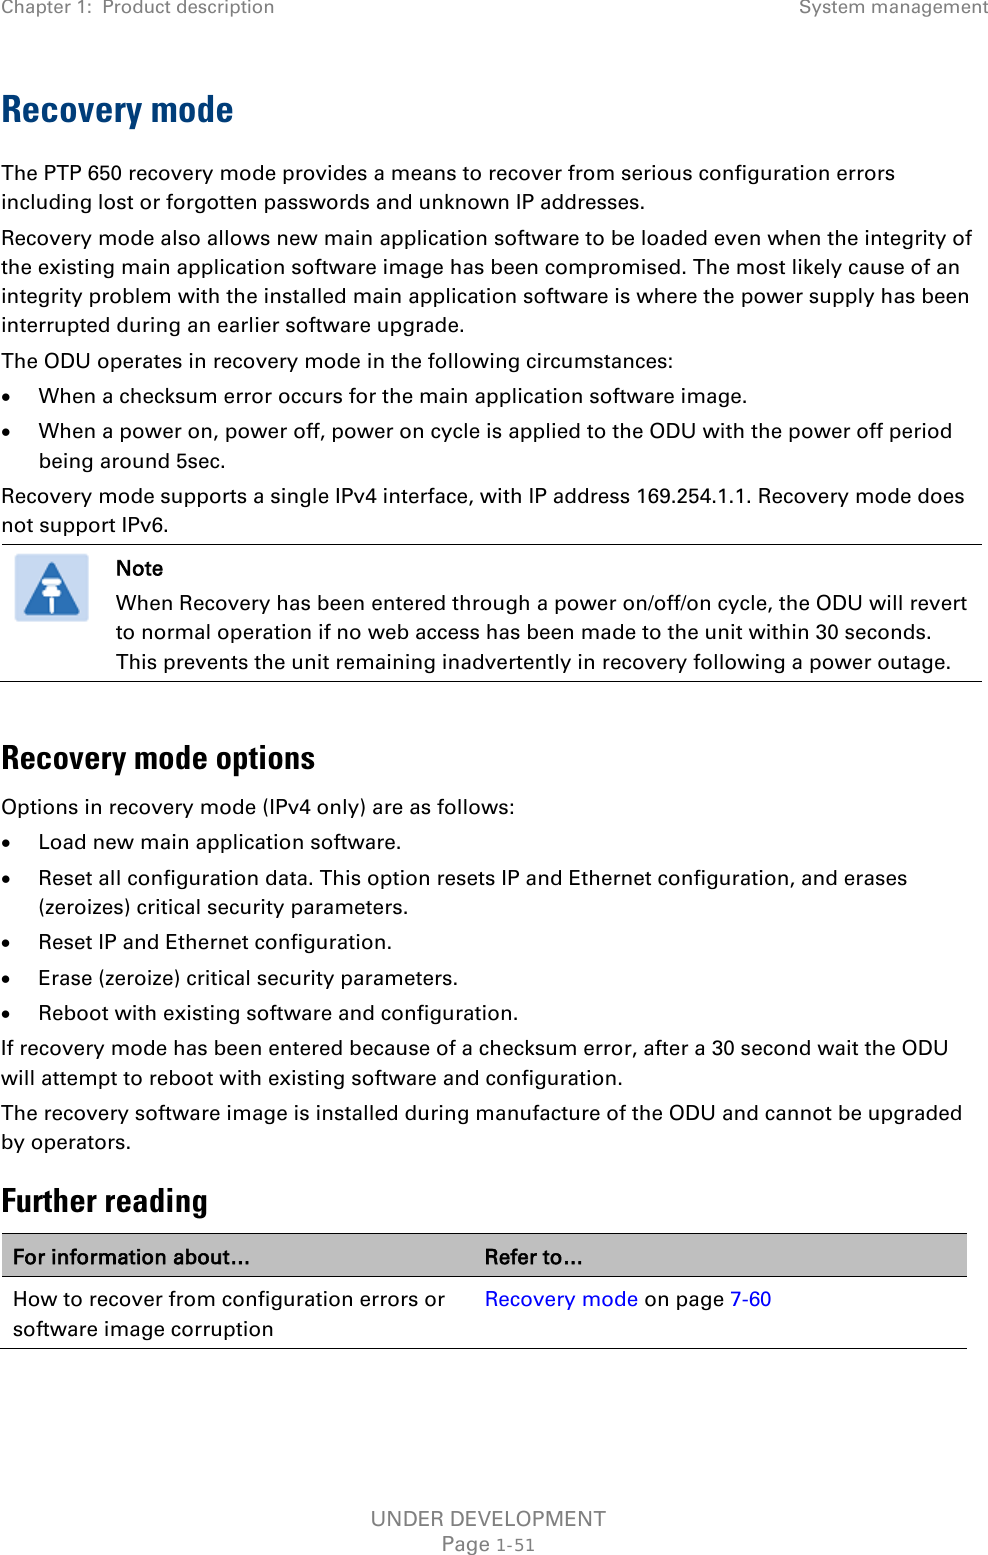 Chapter 1:  Product description System management  Recovery mode The PTP 650 recovery mode provides a means to recover from serious configuration errors including lost or forgotten passwords and unknown IP addresses. Recovery mode also allows new main application software to be loaded even when the integrity of the existing main application software image has been compromised. The most likely cause of an integrity problem with the installed main application software is where the power supply has been interrupted during an earlier software upgrade. The ODU operates in recovery mode in the following circumstances: • When a checksum error occurs for the main application software image. • When a power on, power off, power on cycle is applied to the ODU with the power off period being around 5sec. Recovery mode supports a single IPv4 interface, with IP address 169.254.1.1. Recovery mode does not support IPv6.  Note When Recovery has been entered through a power on/off/on cycle, the ODU will revert to normal operation if no web access has been made to the unit within 30 seconds. This prevents the unit remaining inadvertently in recovery following a power outage.  Recovery mode options Options in recovery mode (IPv4 only) are as follows: • Load new main application software. • Reset all configuration data. This option resets IP and Ethernet configuration, and erases (zeroizes) critical security parameters. • Reset IP and Ethernet configuration. • Erase (zeroize) critical security parameters. • Reboot with existing software and configuration. If recovery mode has been entered because of a checksum error, after a 30 second wait the ODU will attempt to reboot with existing software and configuration. The recovery software image is installed during manufacture of the ODU and cannot be upgraded by operators. Further reading For information about… Refer to… How to recover from configuration errors or software image corruption Recovery mode on page 7-60  UNDER DEVELOPMENT Page 1-51 